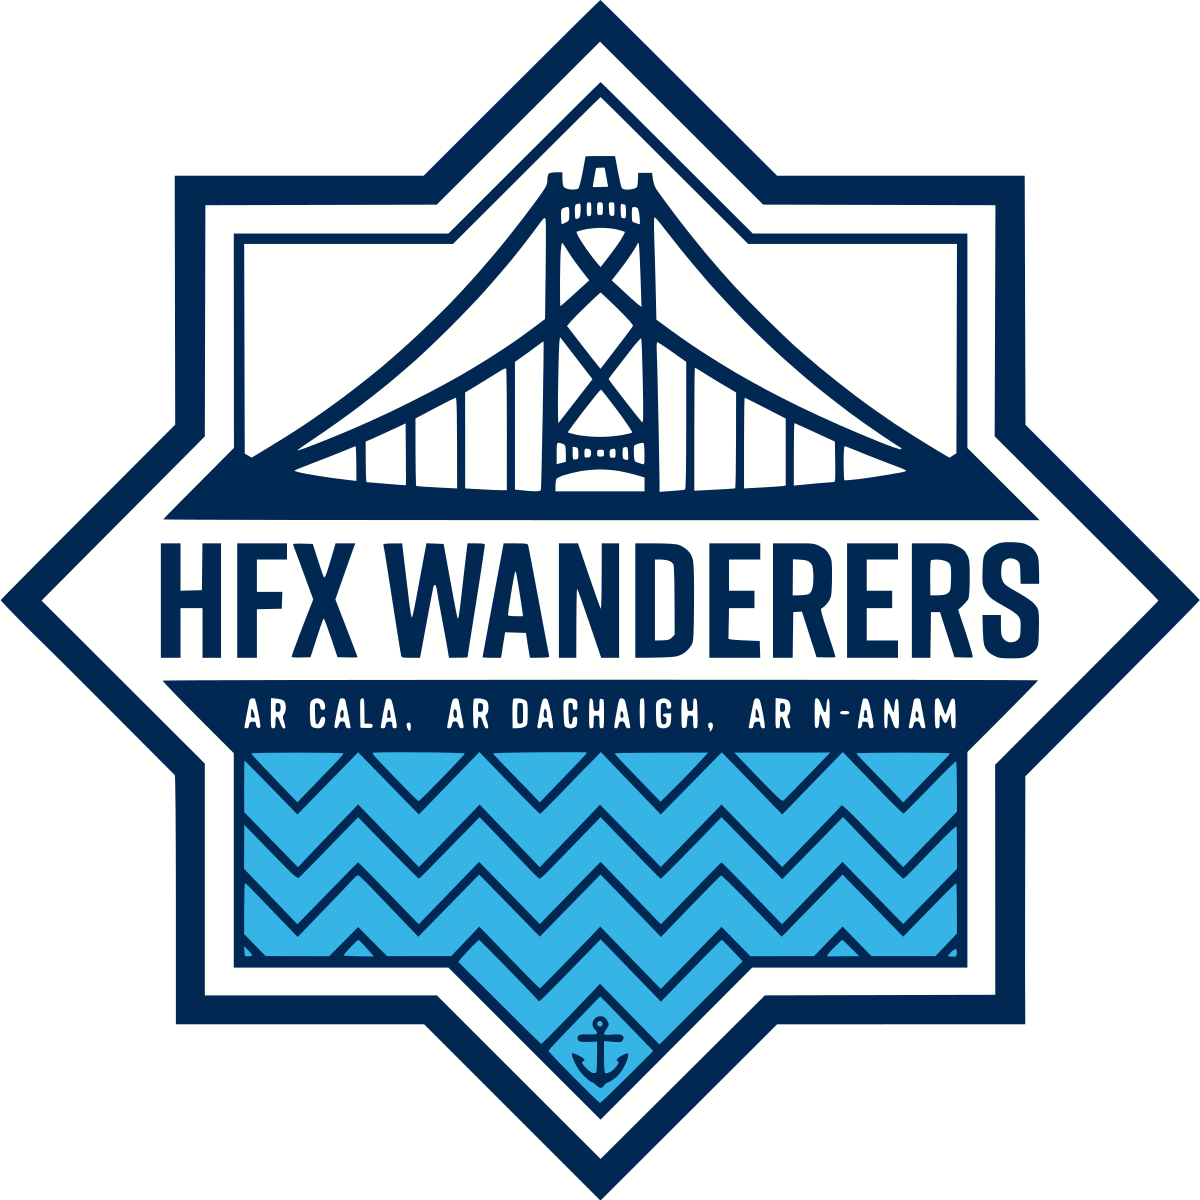 HFX Wanderers FC